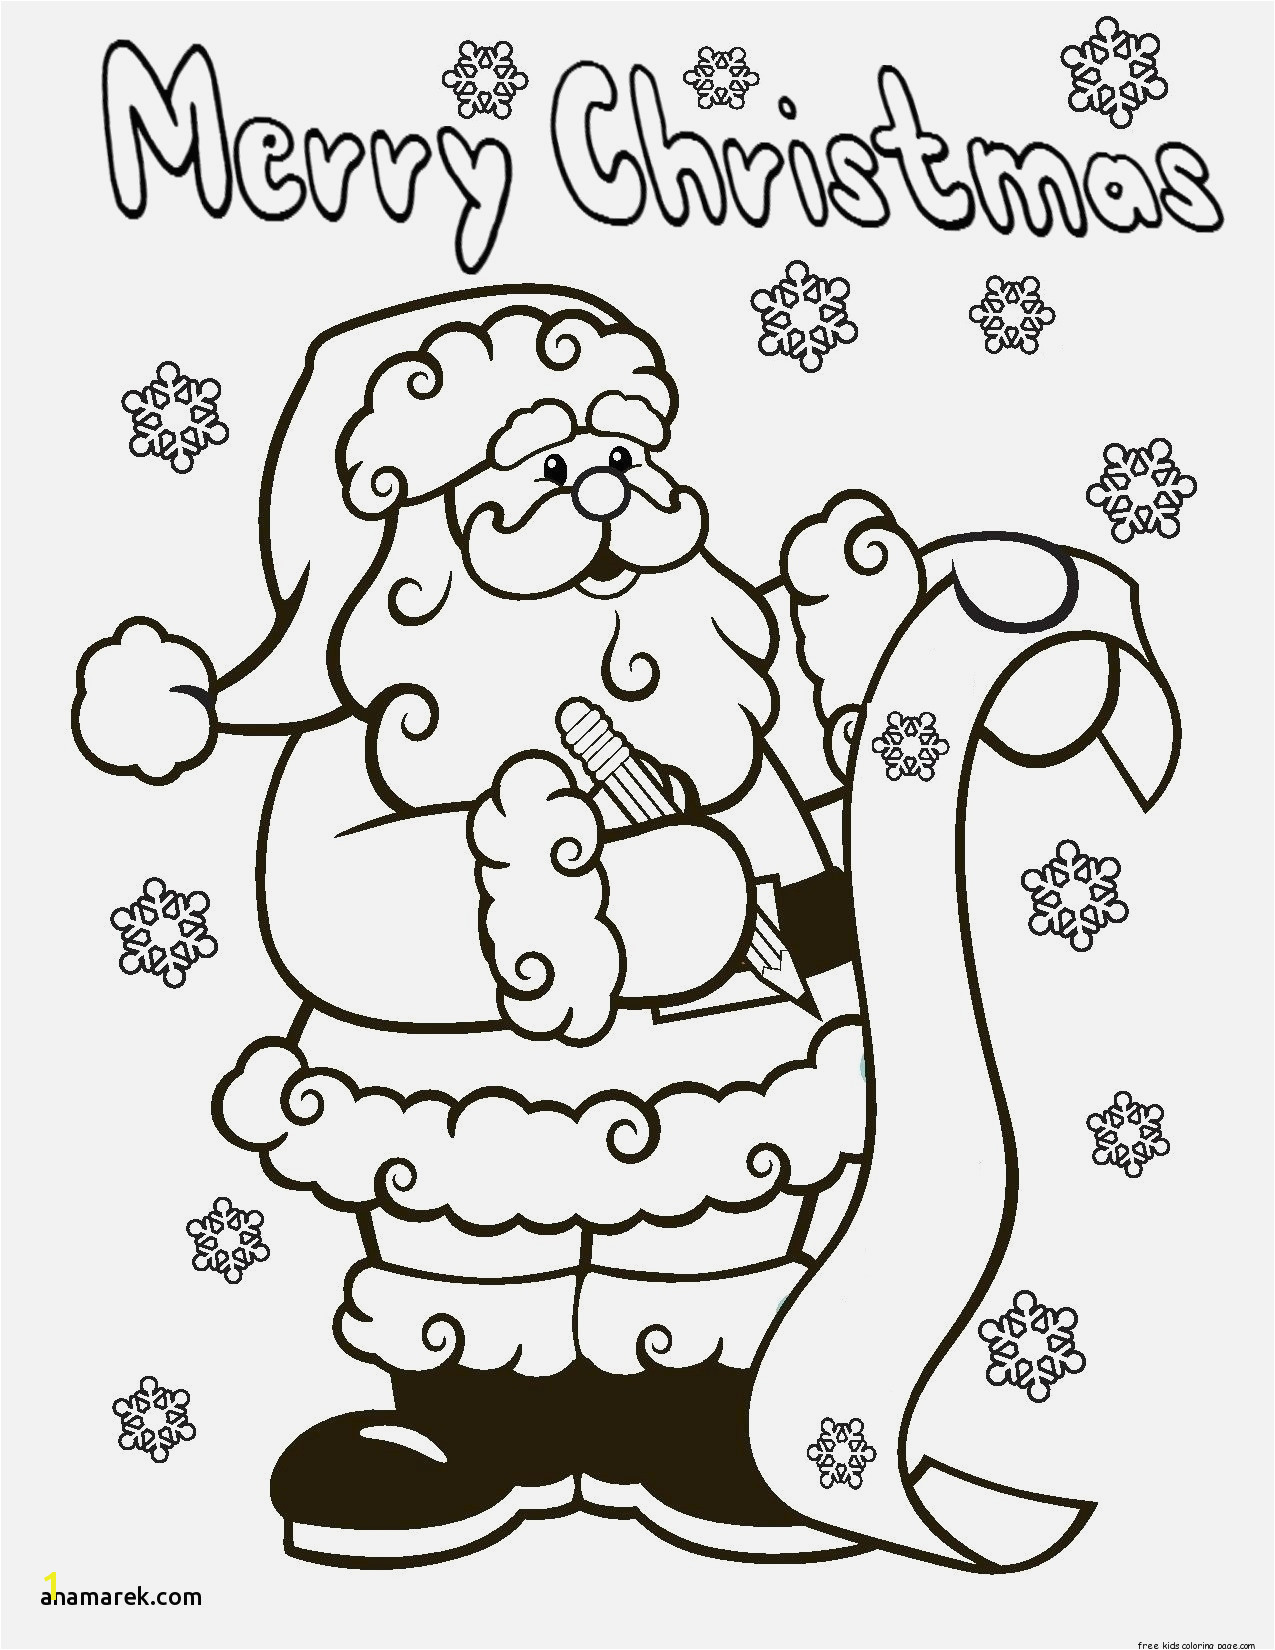 Mickeys Christmas Coloring Pages Minnie Mouse Coloring Pages Easy and Fun Printable Mickey Mouse In